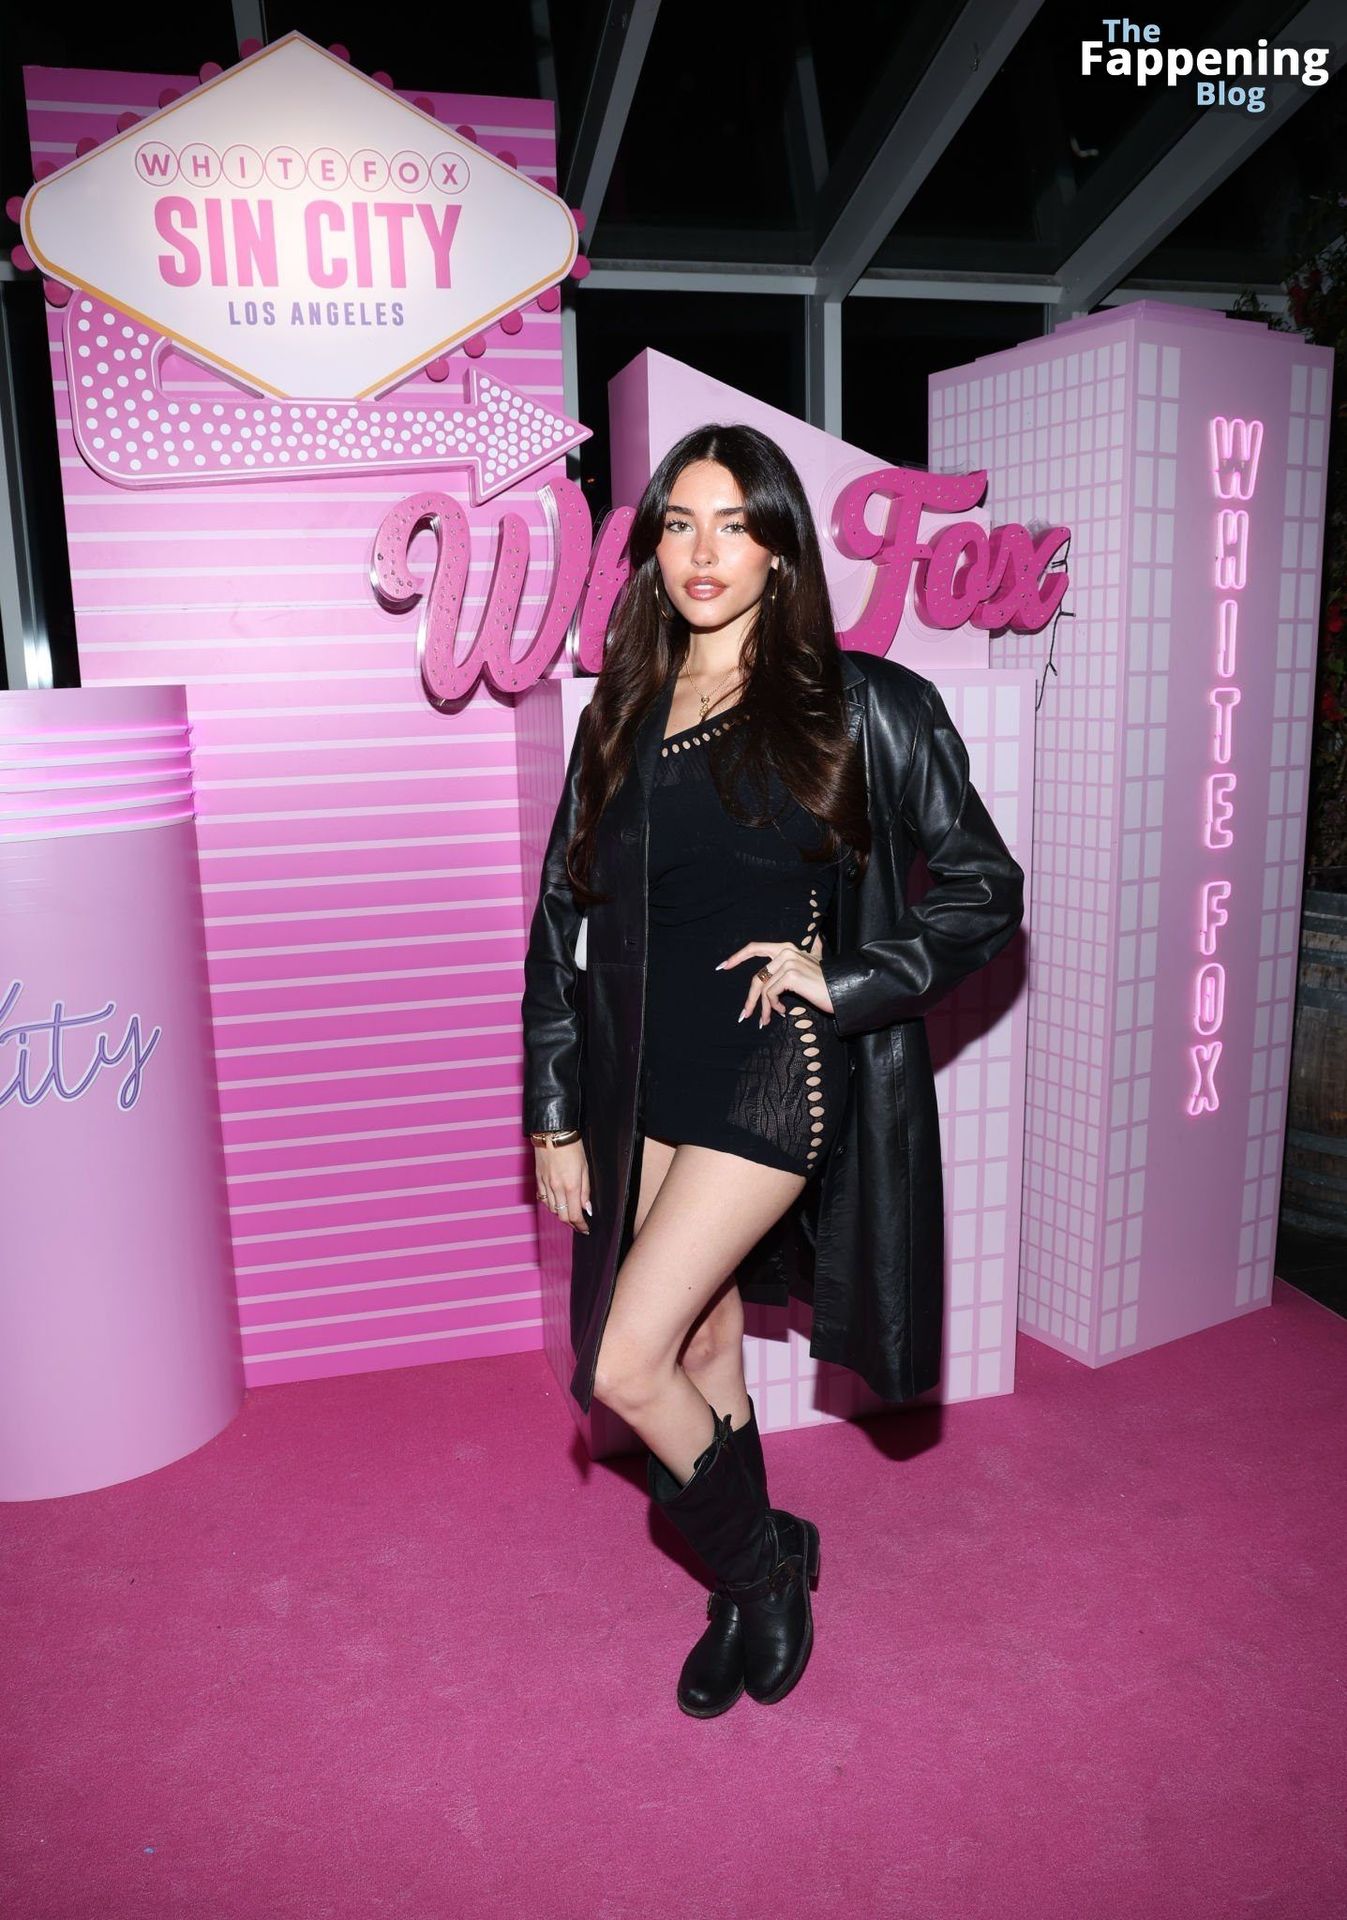 madison-beer-sexy-black-dress-white-fox-sin-city-party-4-thefappeningblog.com_.jpg